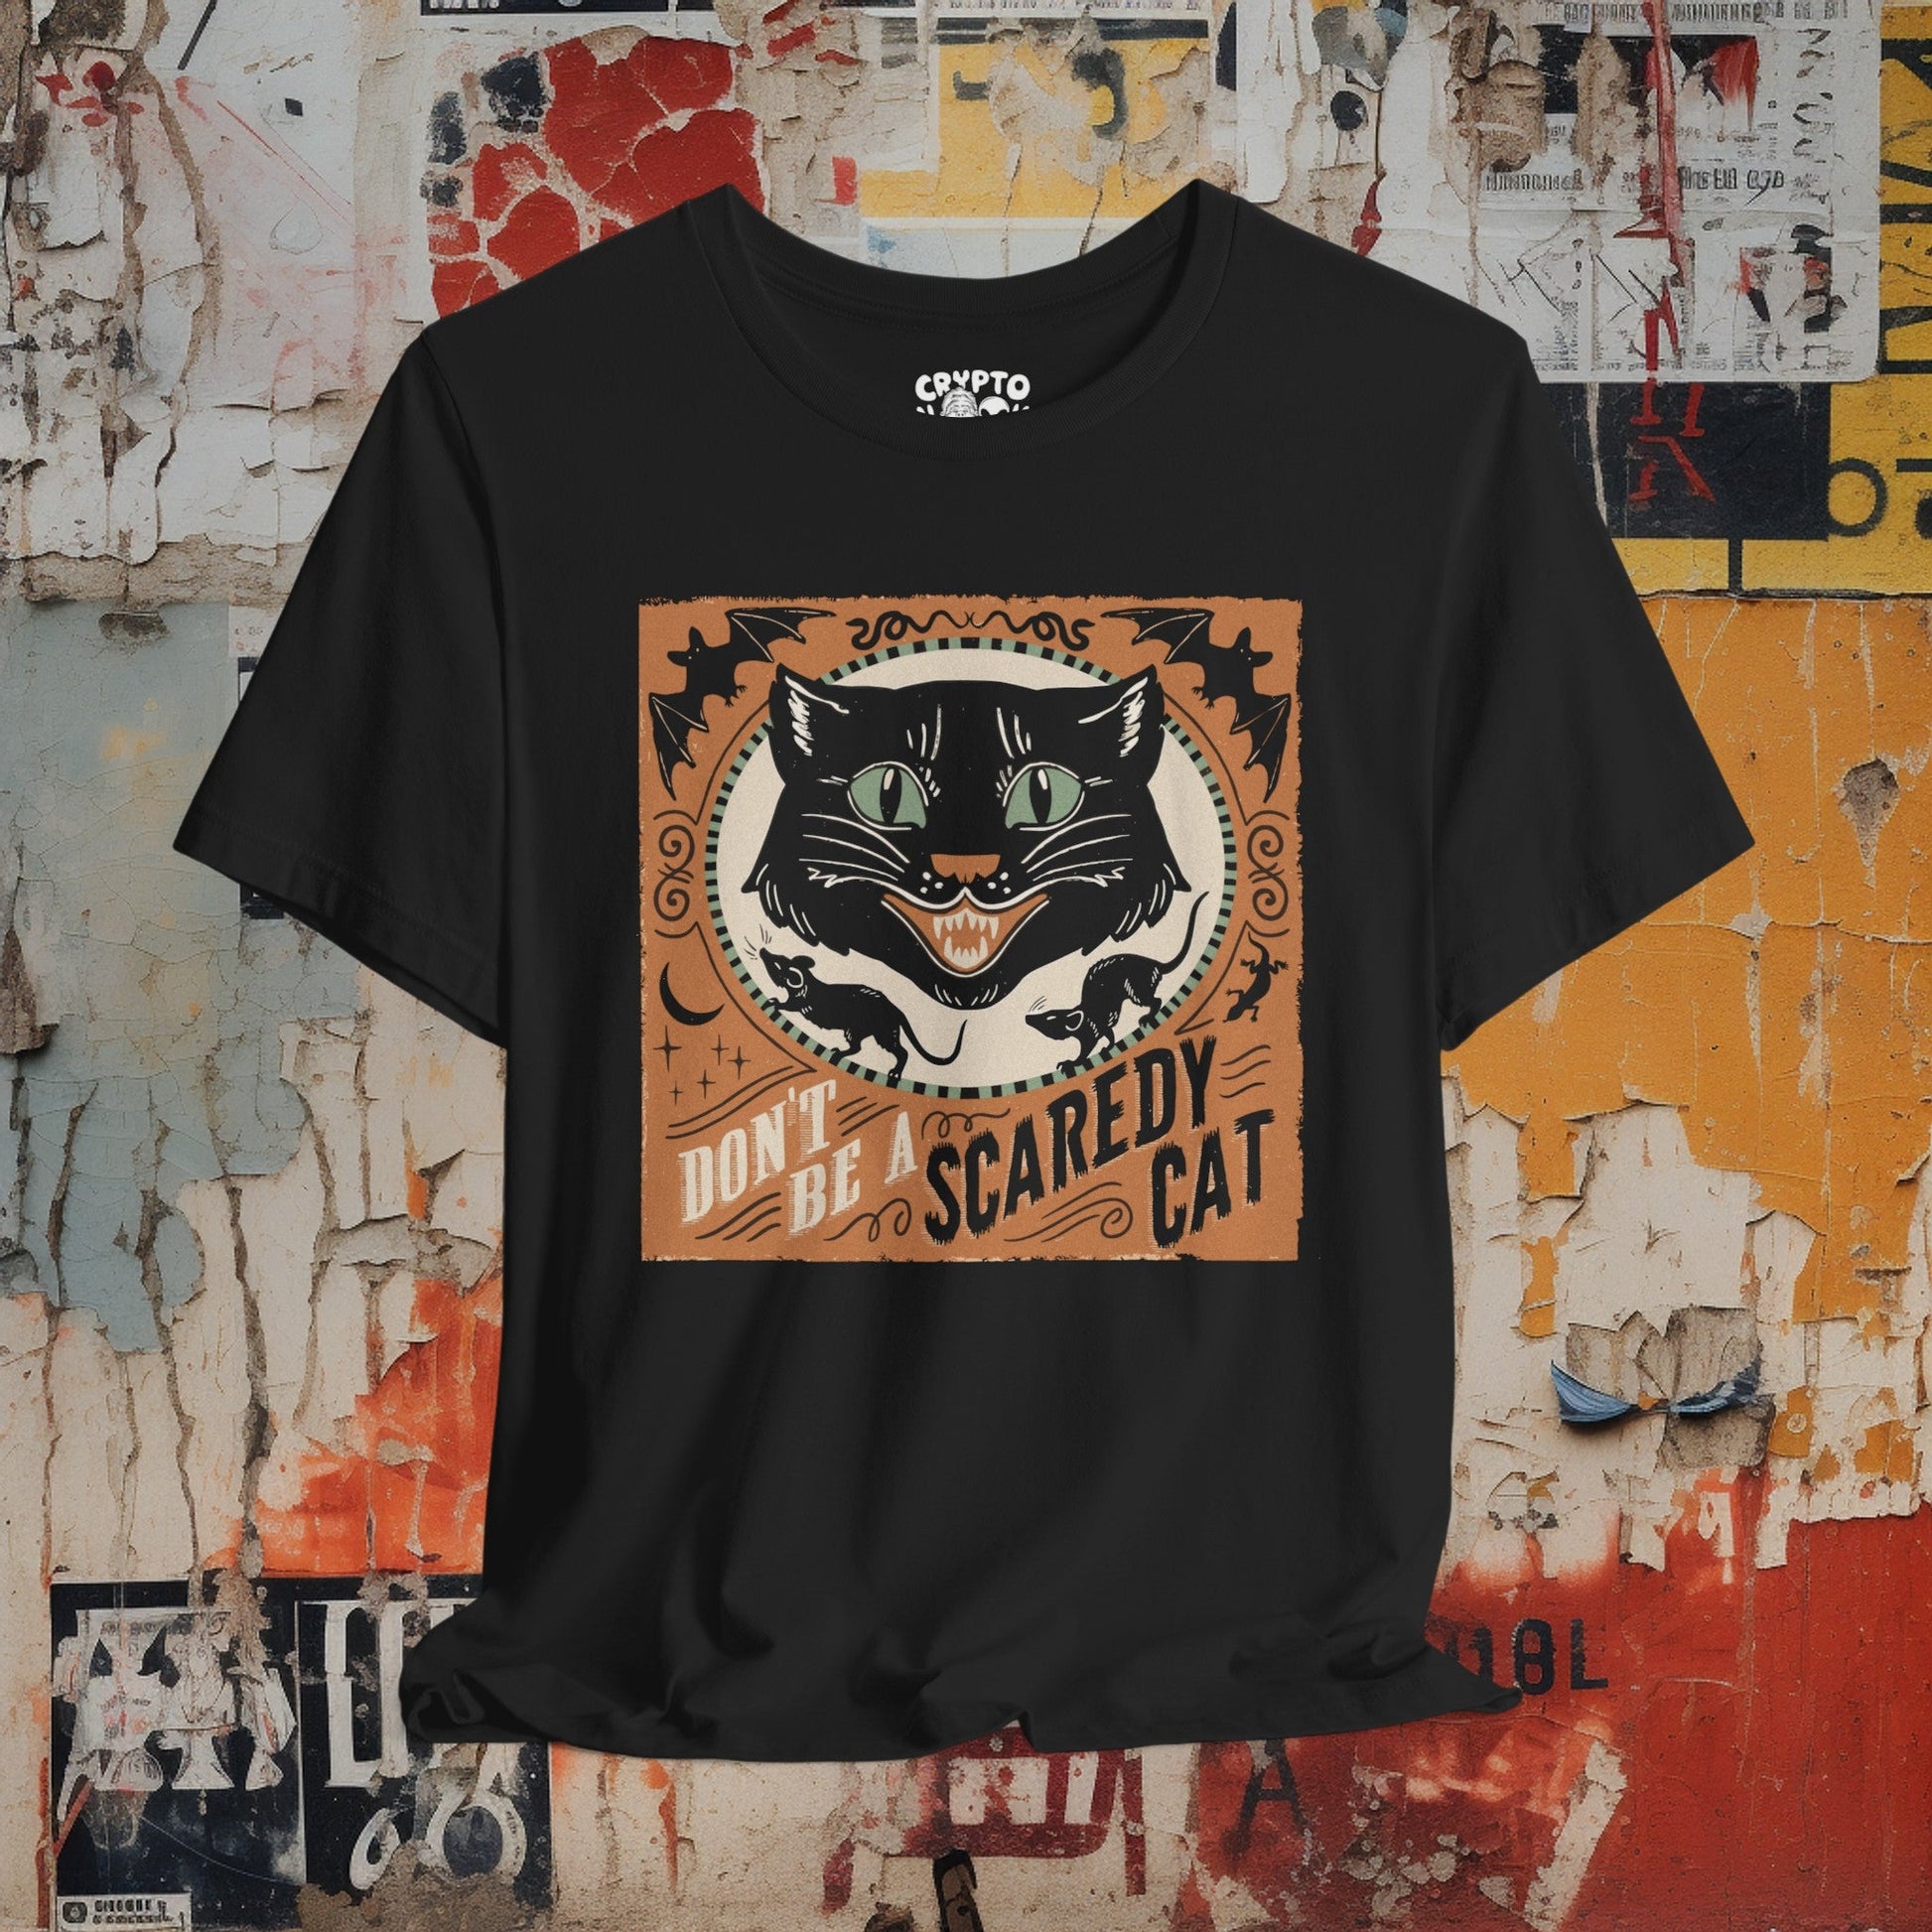 T-Shirt - Don't Be A Scaredy Cat Vintage Halloween Tee | Bella + Canvas Unisex T-shirt from Crypto Zoo Tees